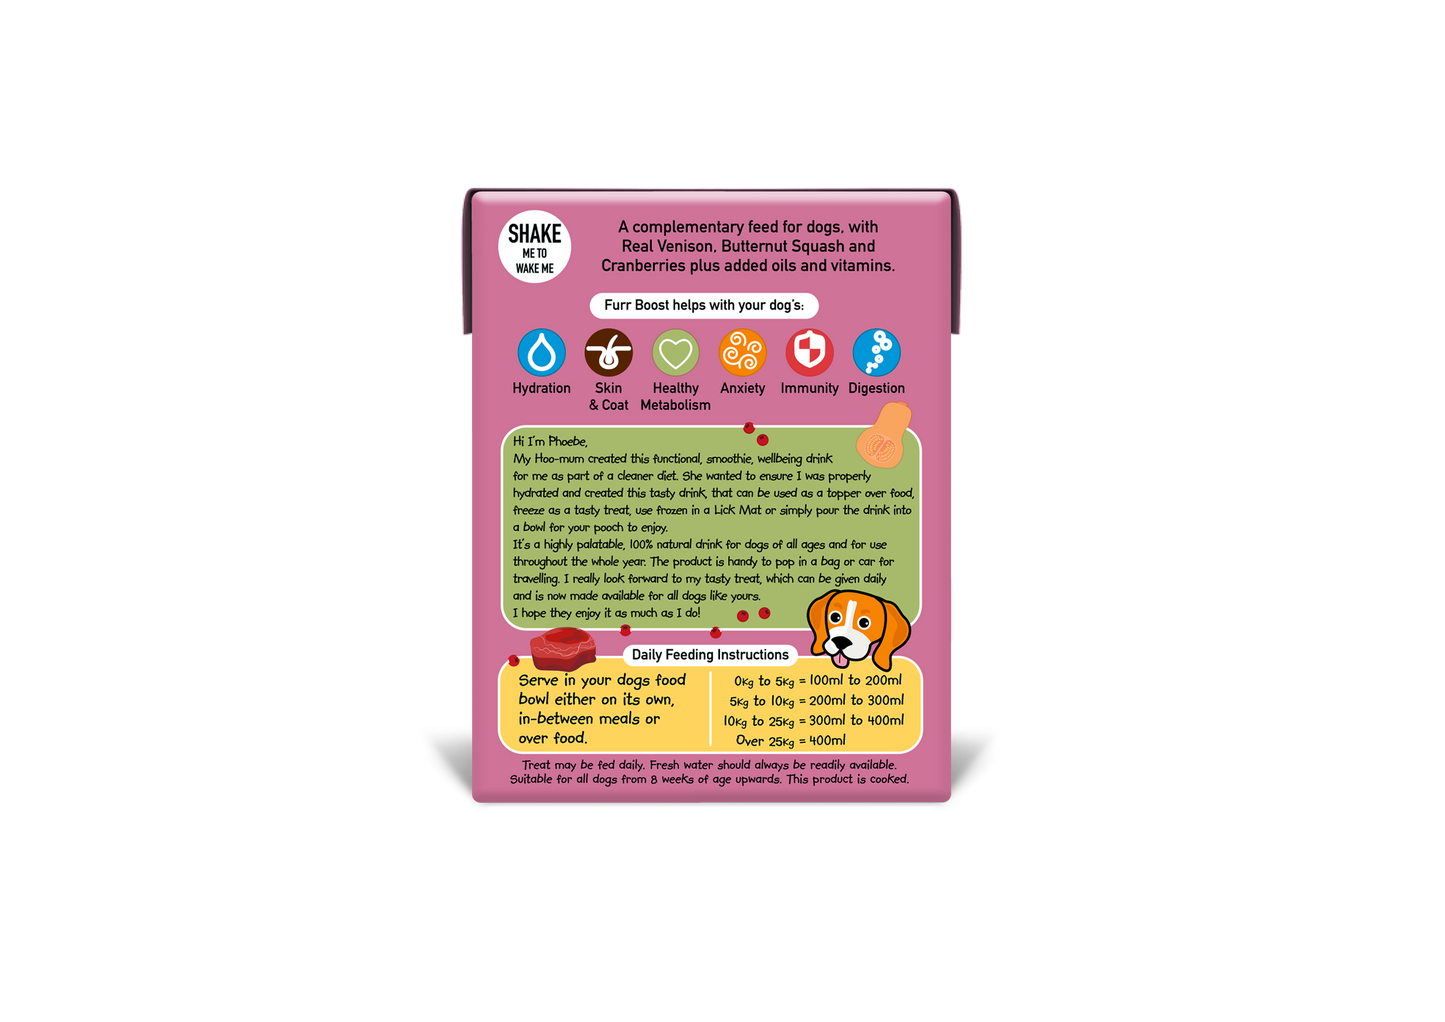 Hydration Drink for Dogs | Venison, Butternut Squash & Cranberry Furr Boost 400ml